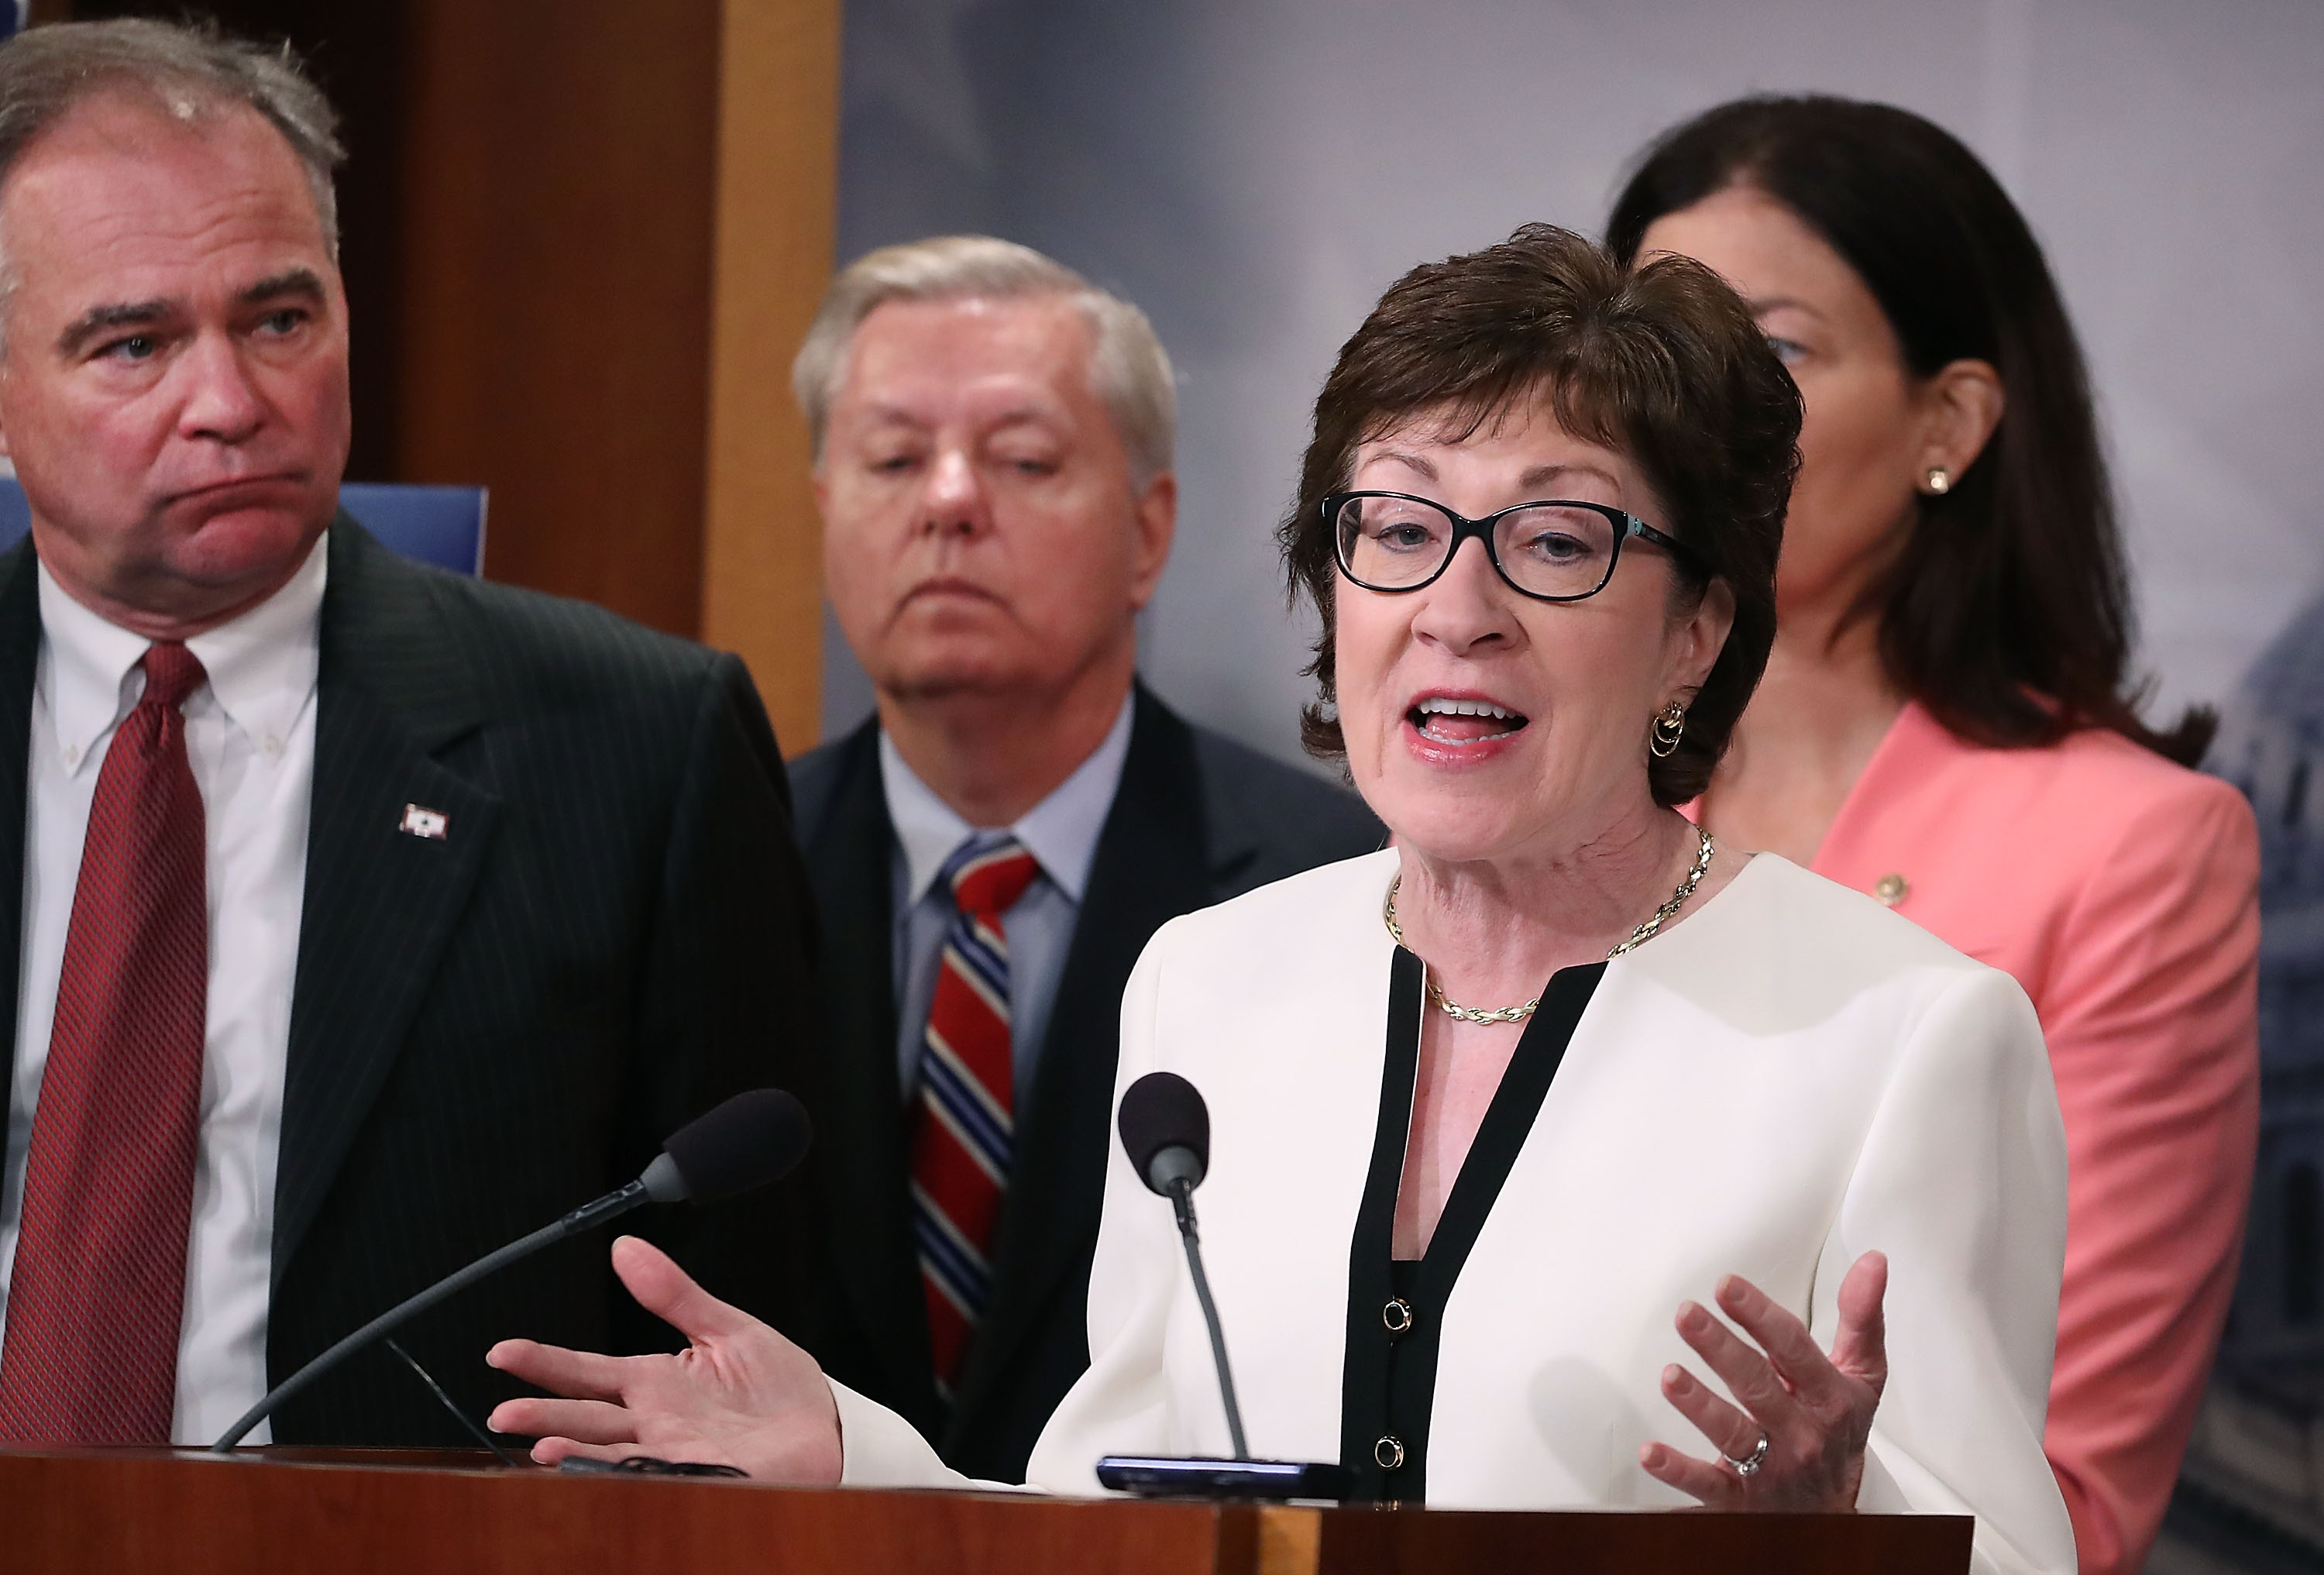 Maine Sen. Susan Collins speaks while flanked by bipartisan Senate colleagues during a news conference on Capitol Hill on June 21, 2016 in Washington, D.C. (Mark Wilson/Getty Images)